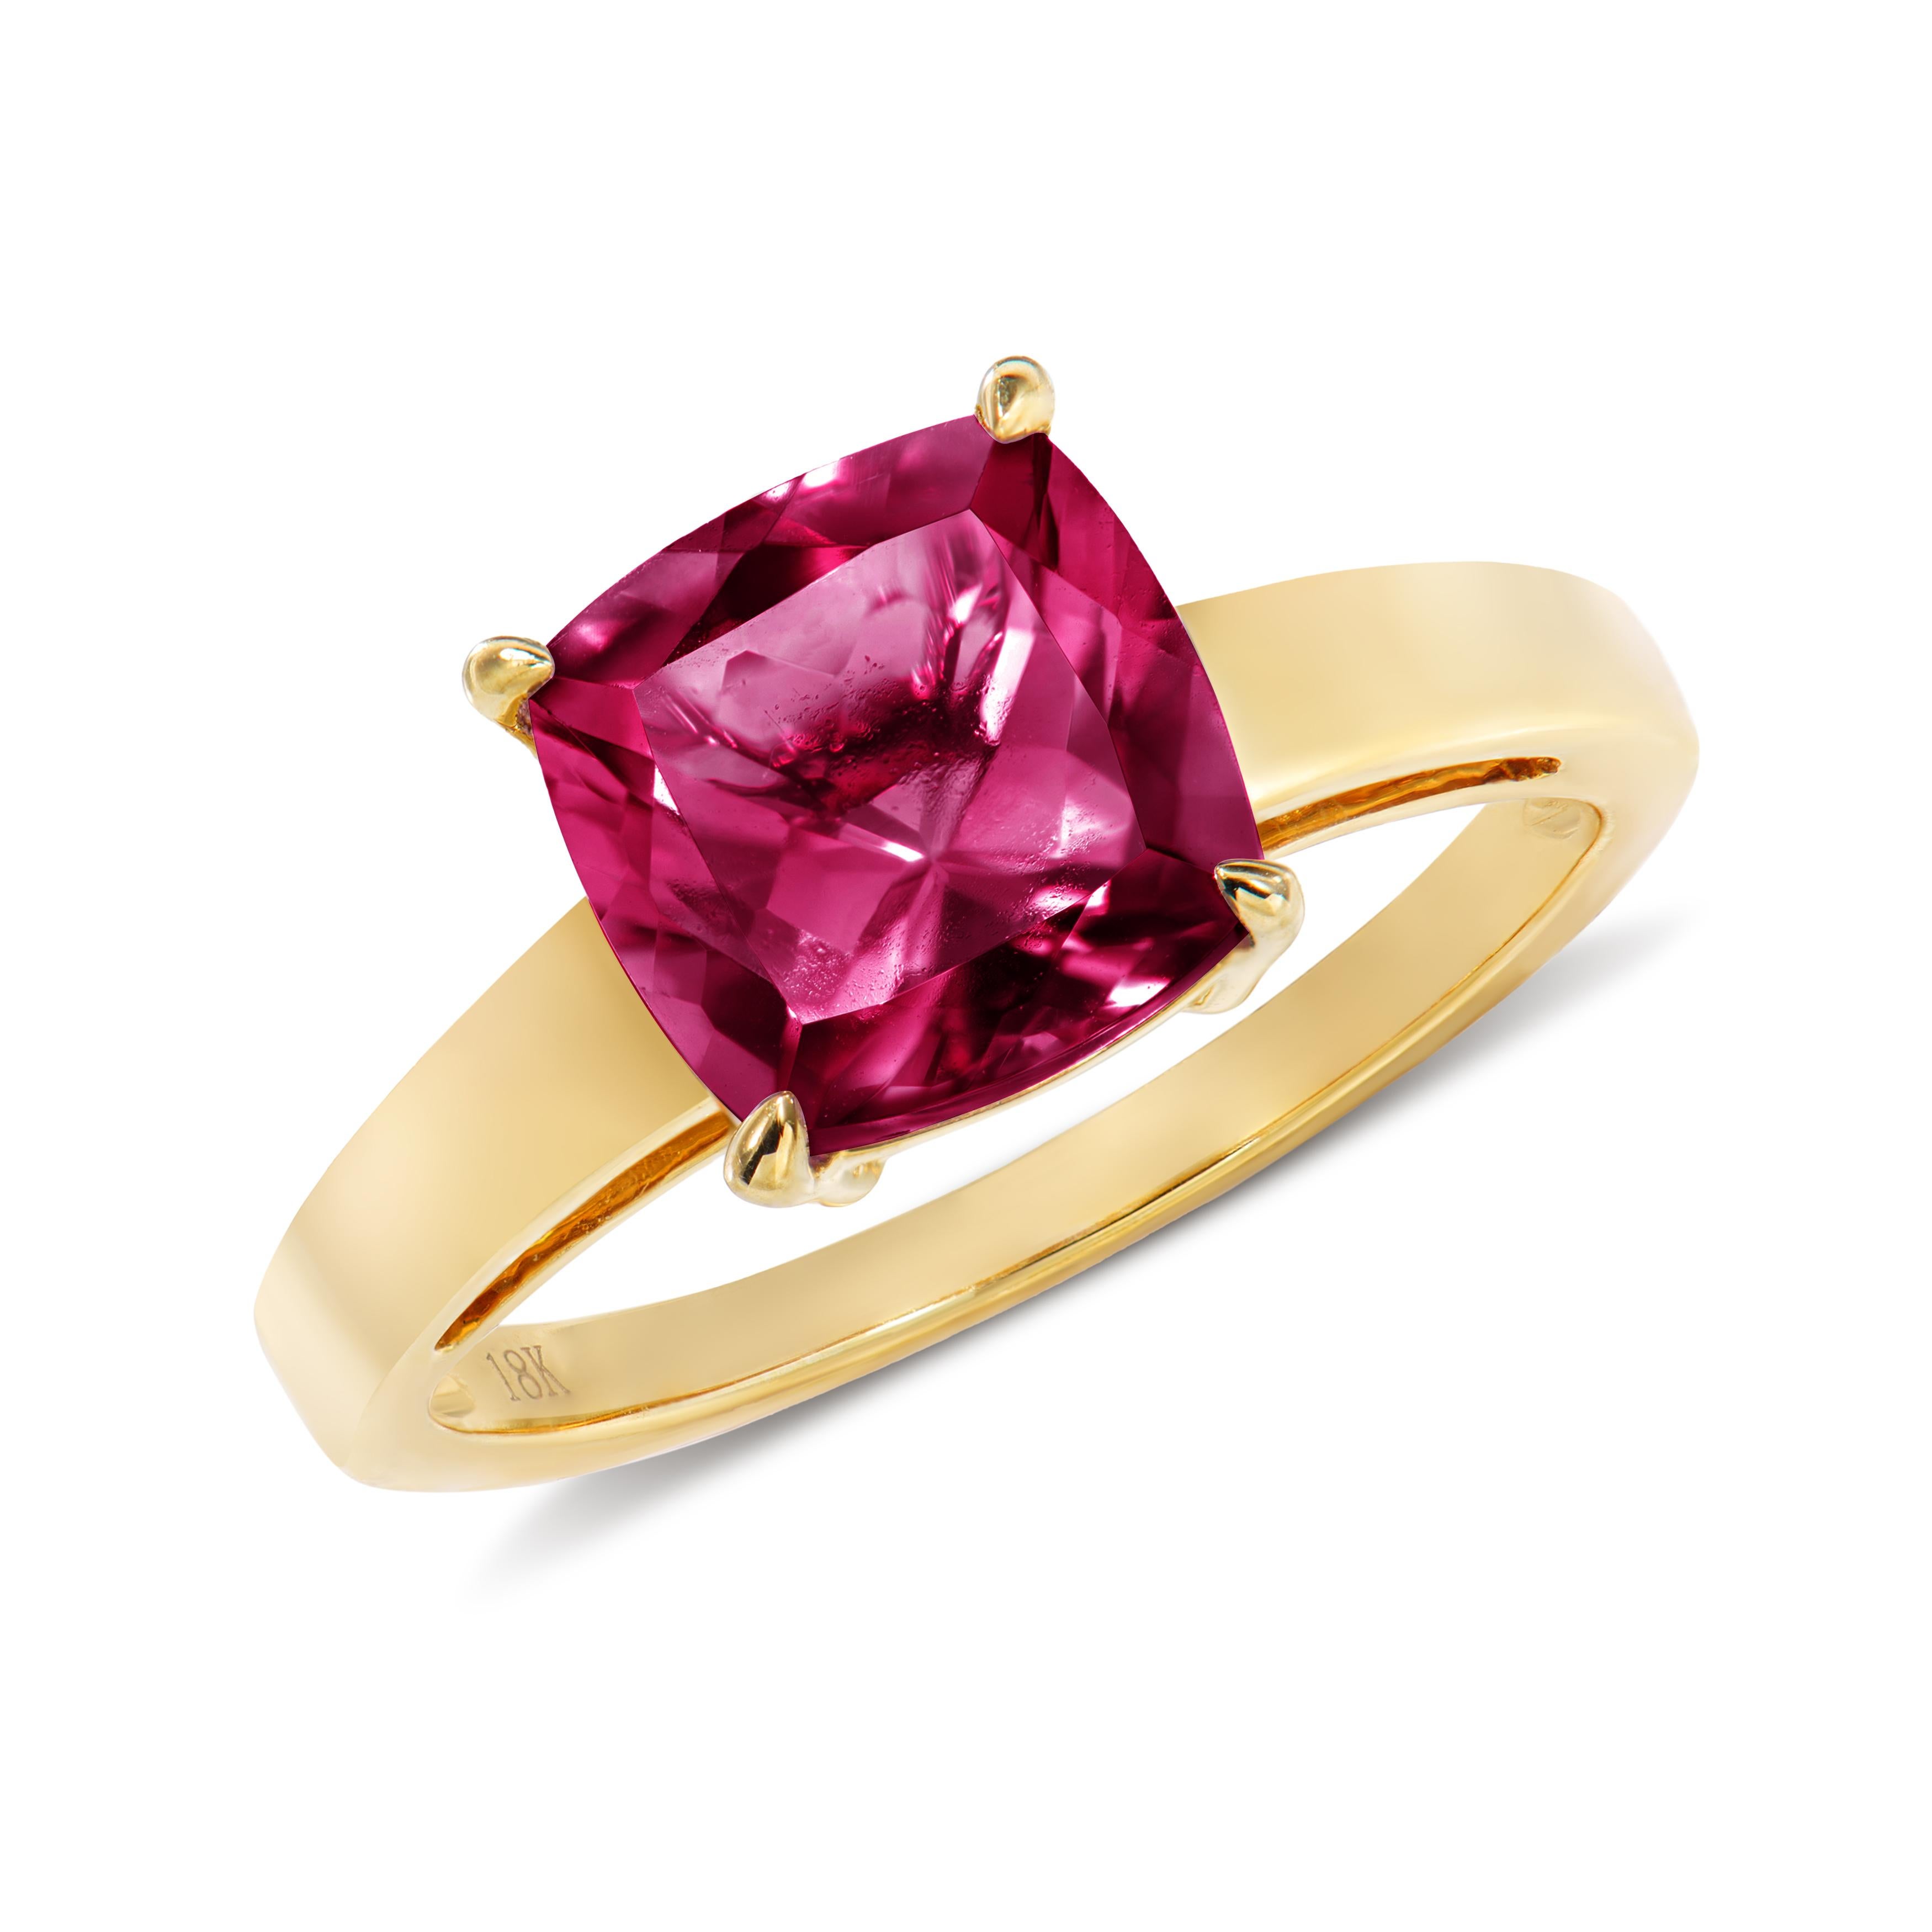 Presented A lovely collection of gems, including Rhodolite, Peridot, Amethyst, Sky Blue Topaz, and Swiss Blue Topaz is perfect for people who value quality and want to wear it to any occasion or celebration. The yellow gold Rhodolite Fancy ring